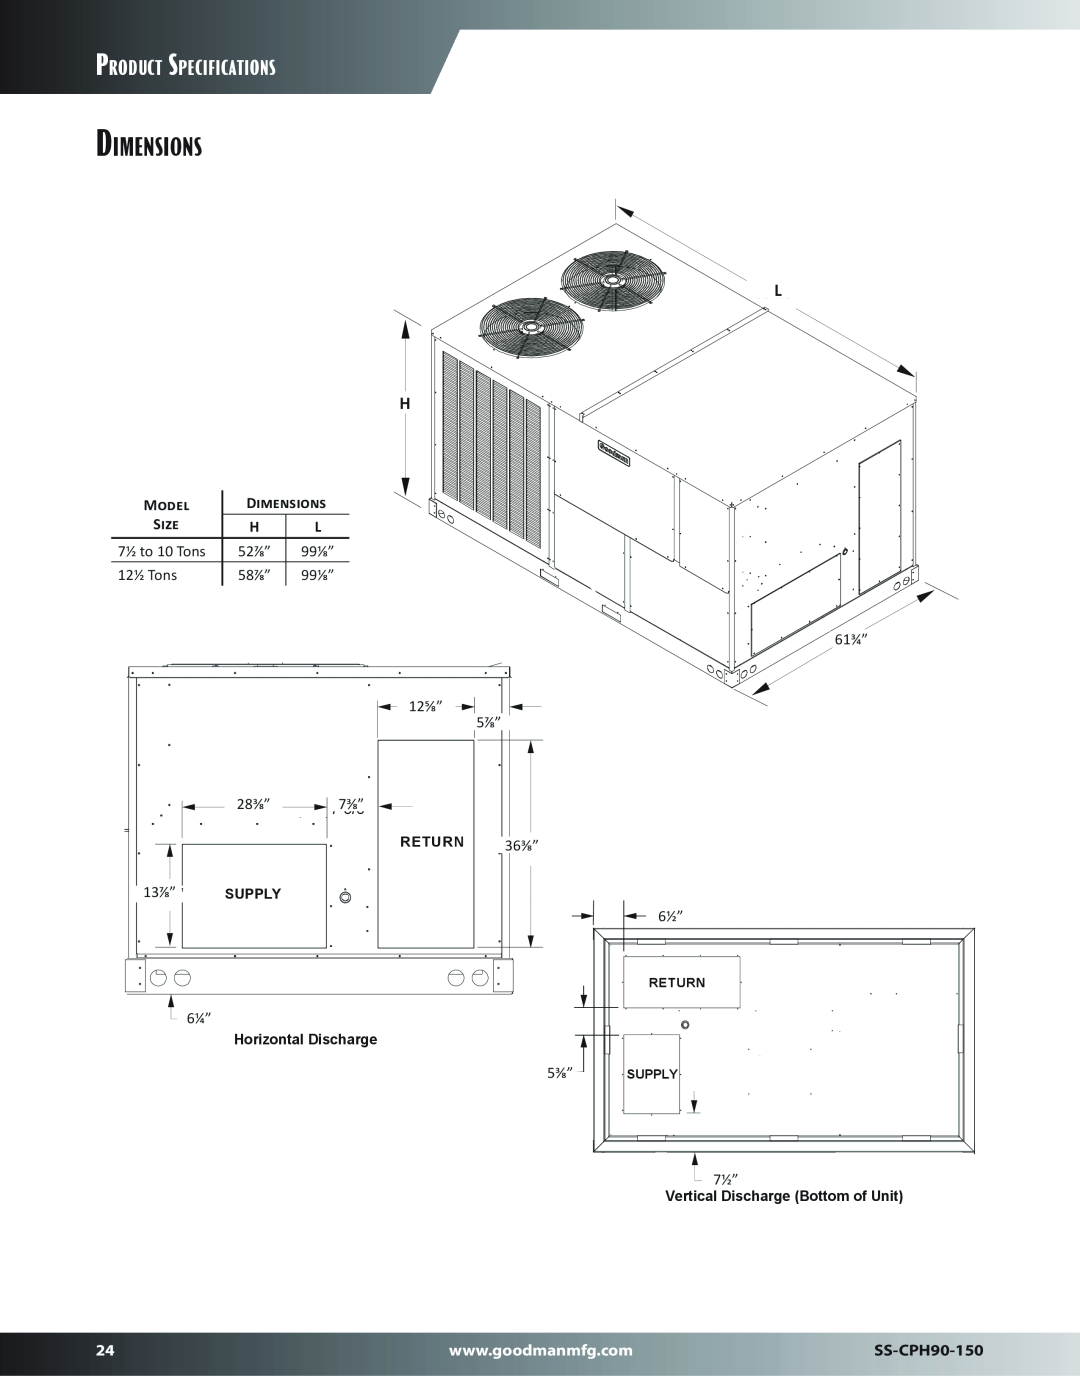 Goodman Mfg SS-CPH90-150 dimensions Dimensions, Product Specifications 